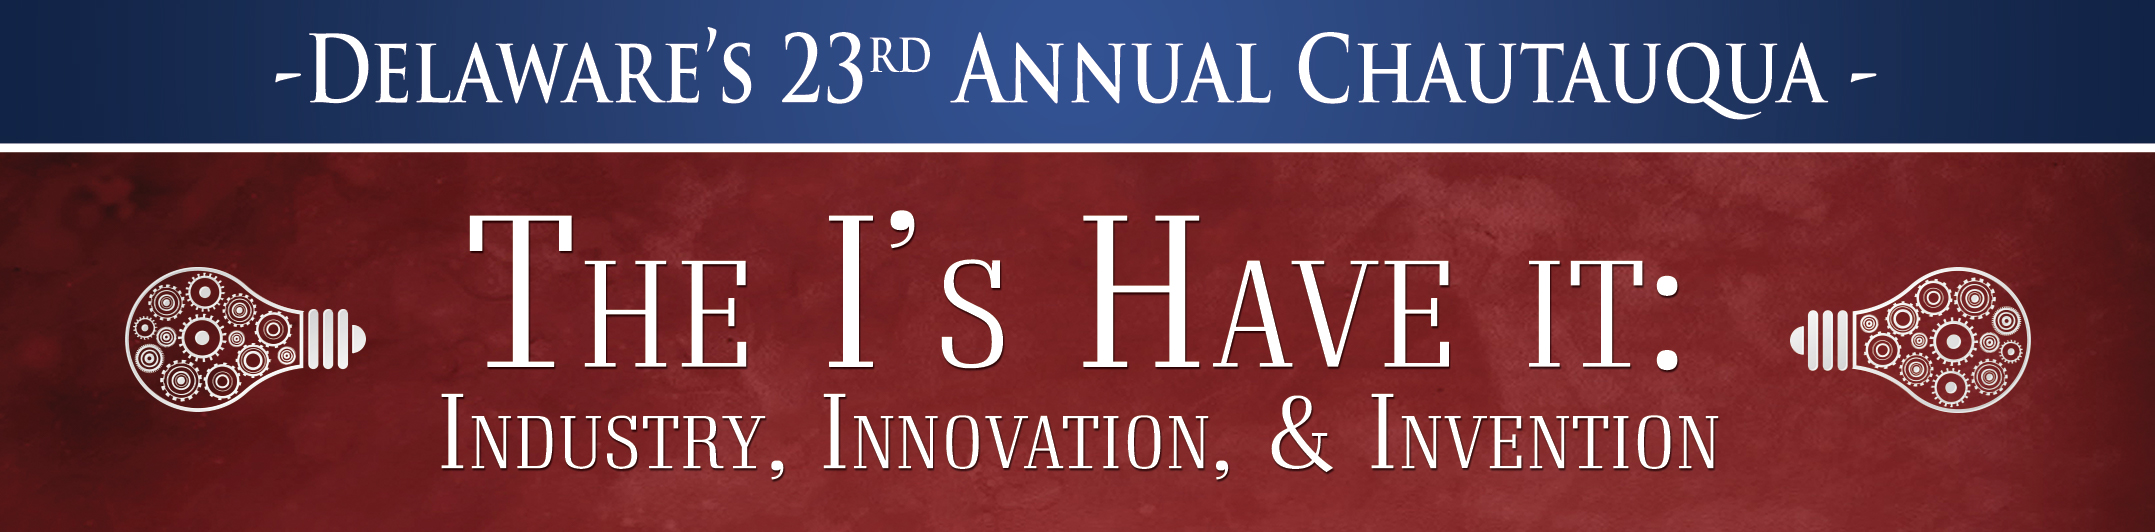 Delaware's 23rd Annual Chautauqua - The I's Have It: Industry, Innovation, and Invention Banner